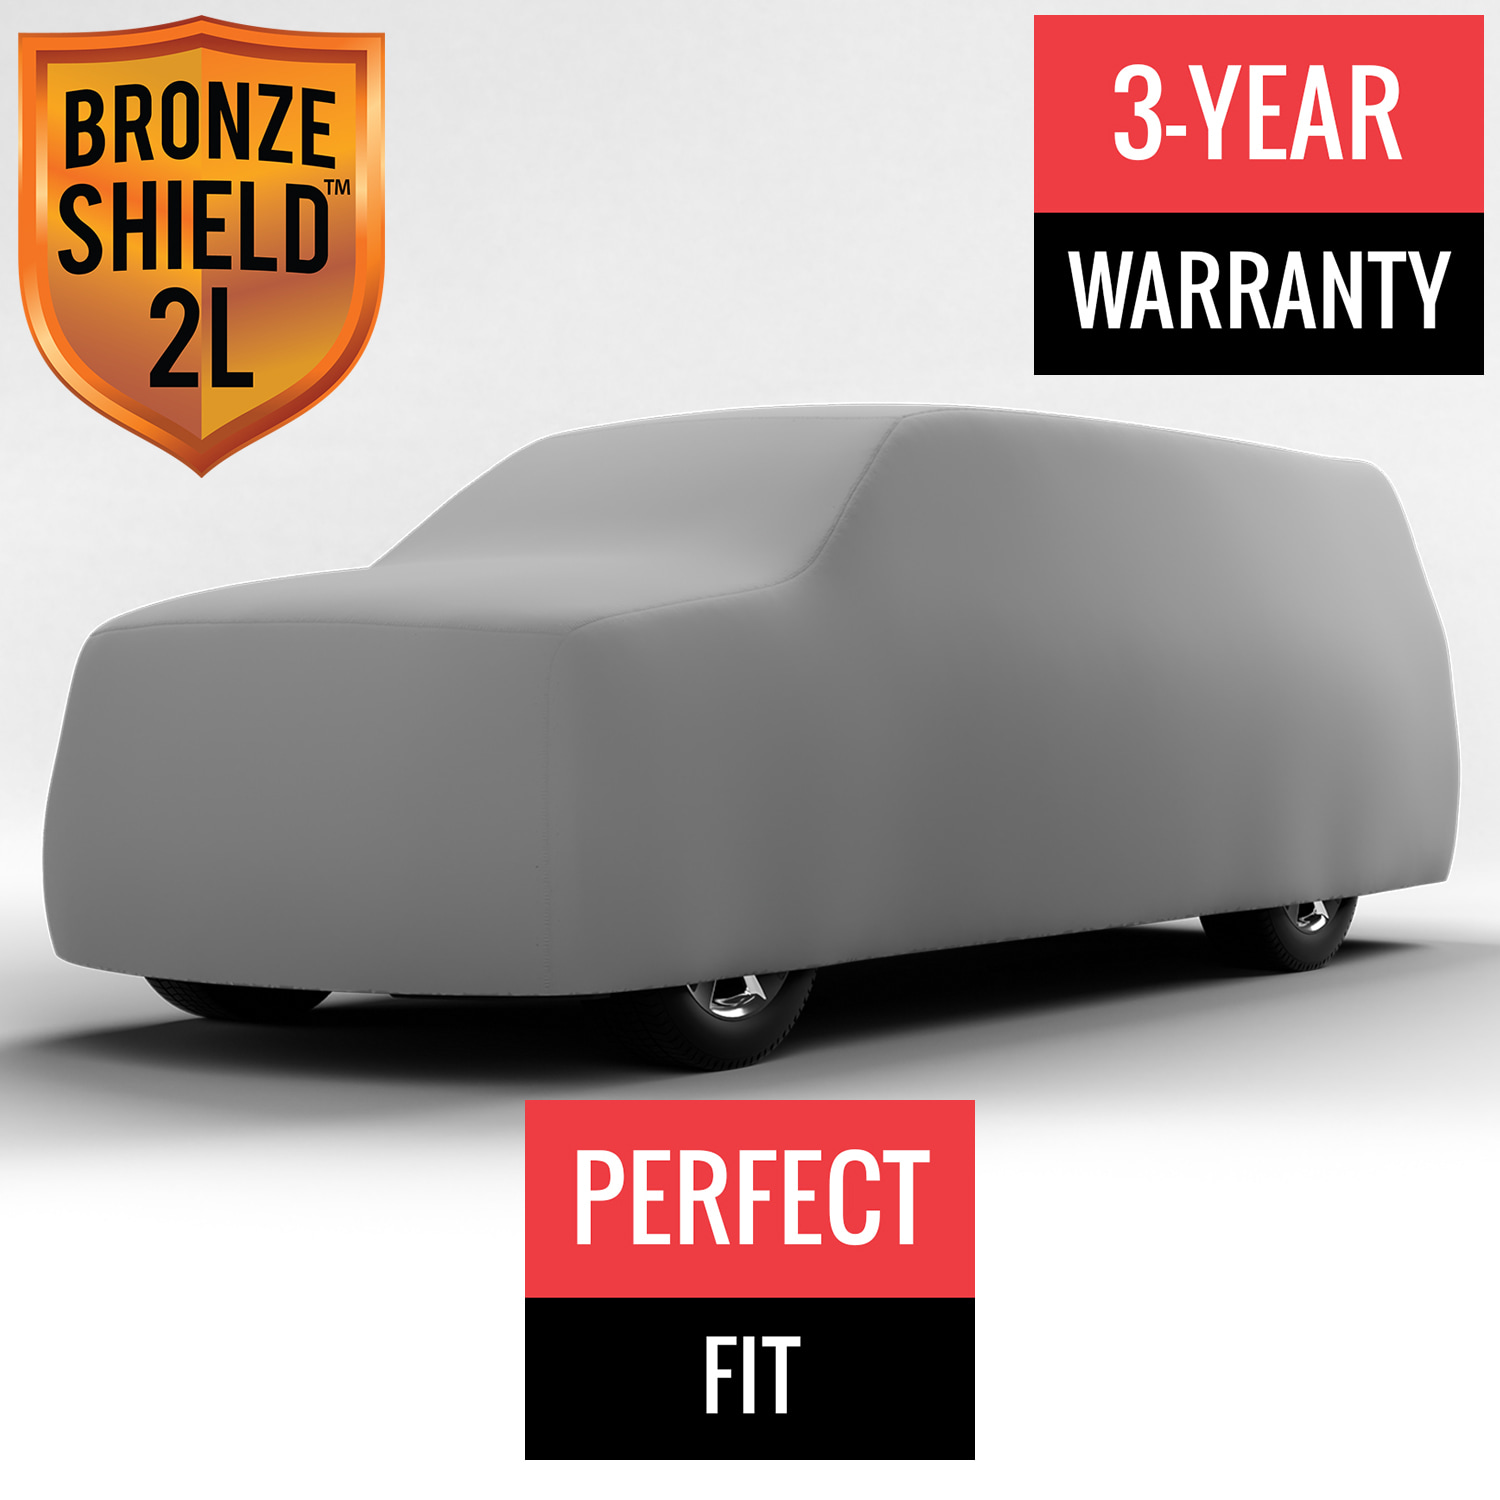 Bronze Shield 2L - Car Cover for GMC C35 Pickup 1968 Regular Cab Pickup 8.0 Feet Bed with Camper Shell